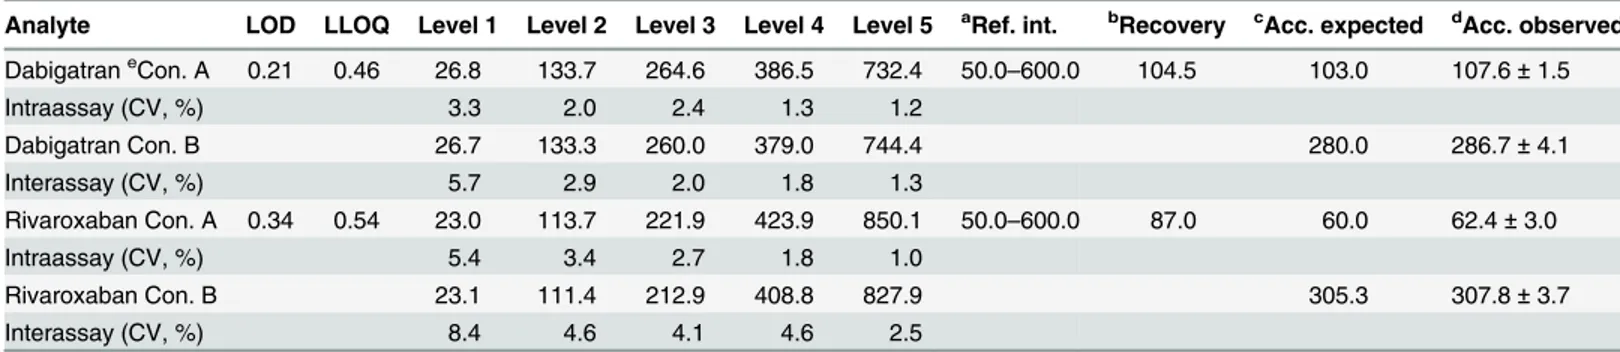 Table 2. Validation results of LOD, LLOQ, precision, recovery and accuracy.